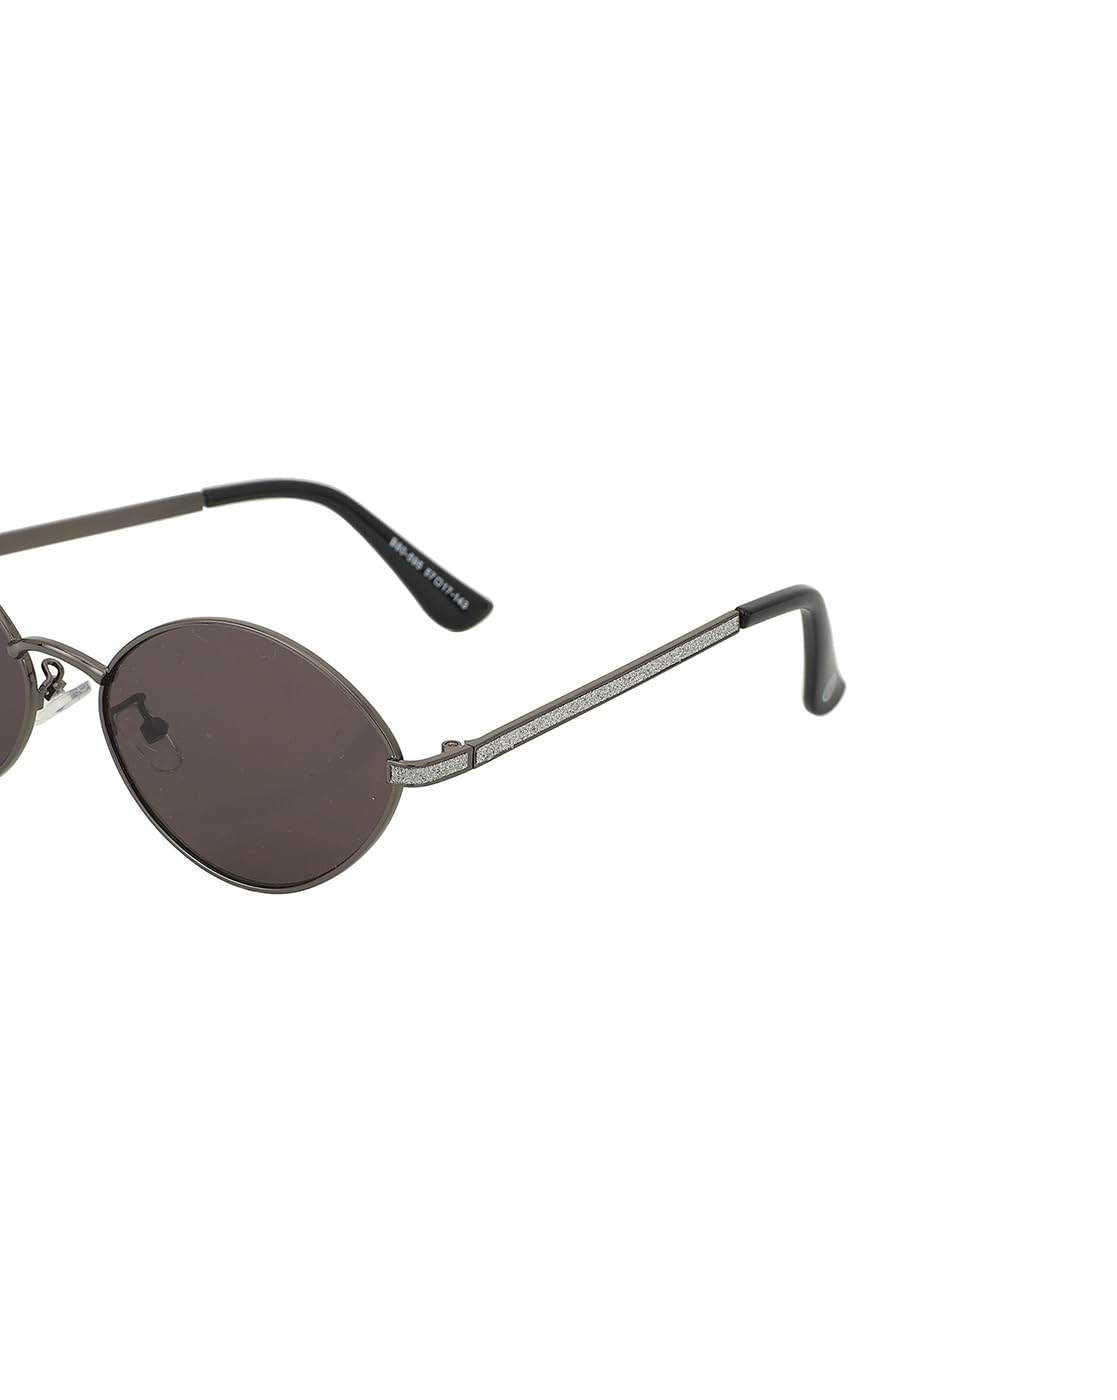 Carlton London Metallic with Silver toned Oval Sunglass for Women and UV Protected Lens